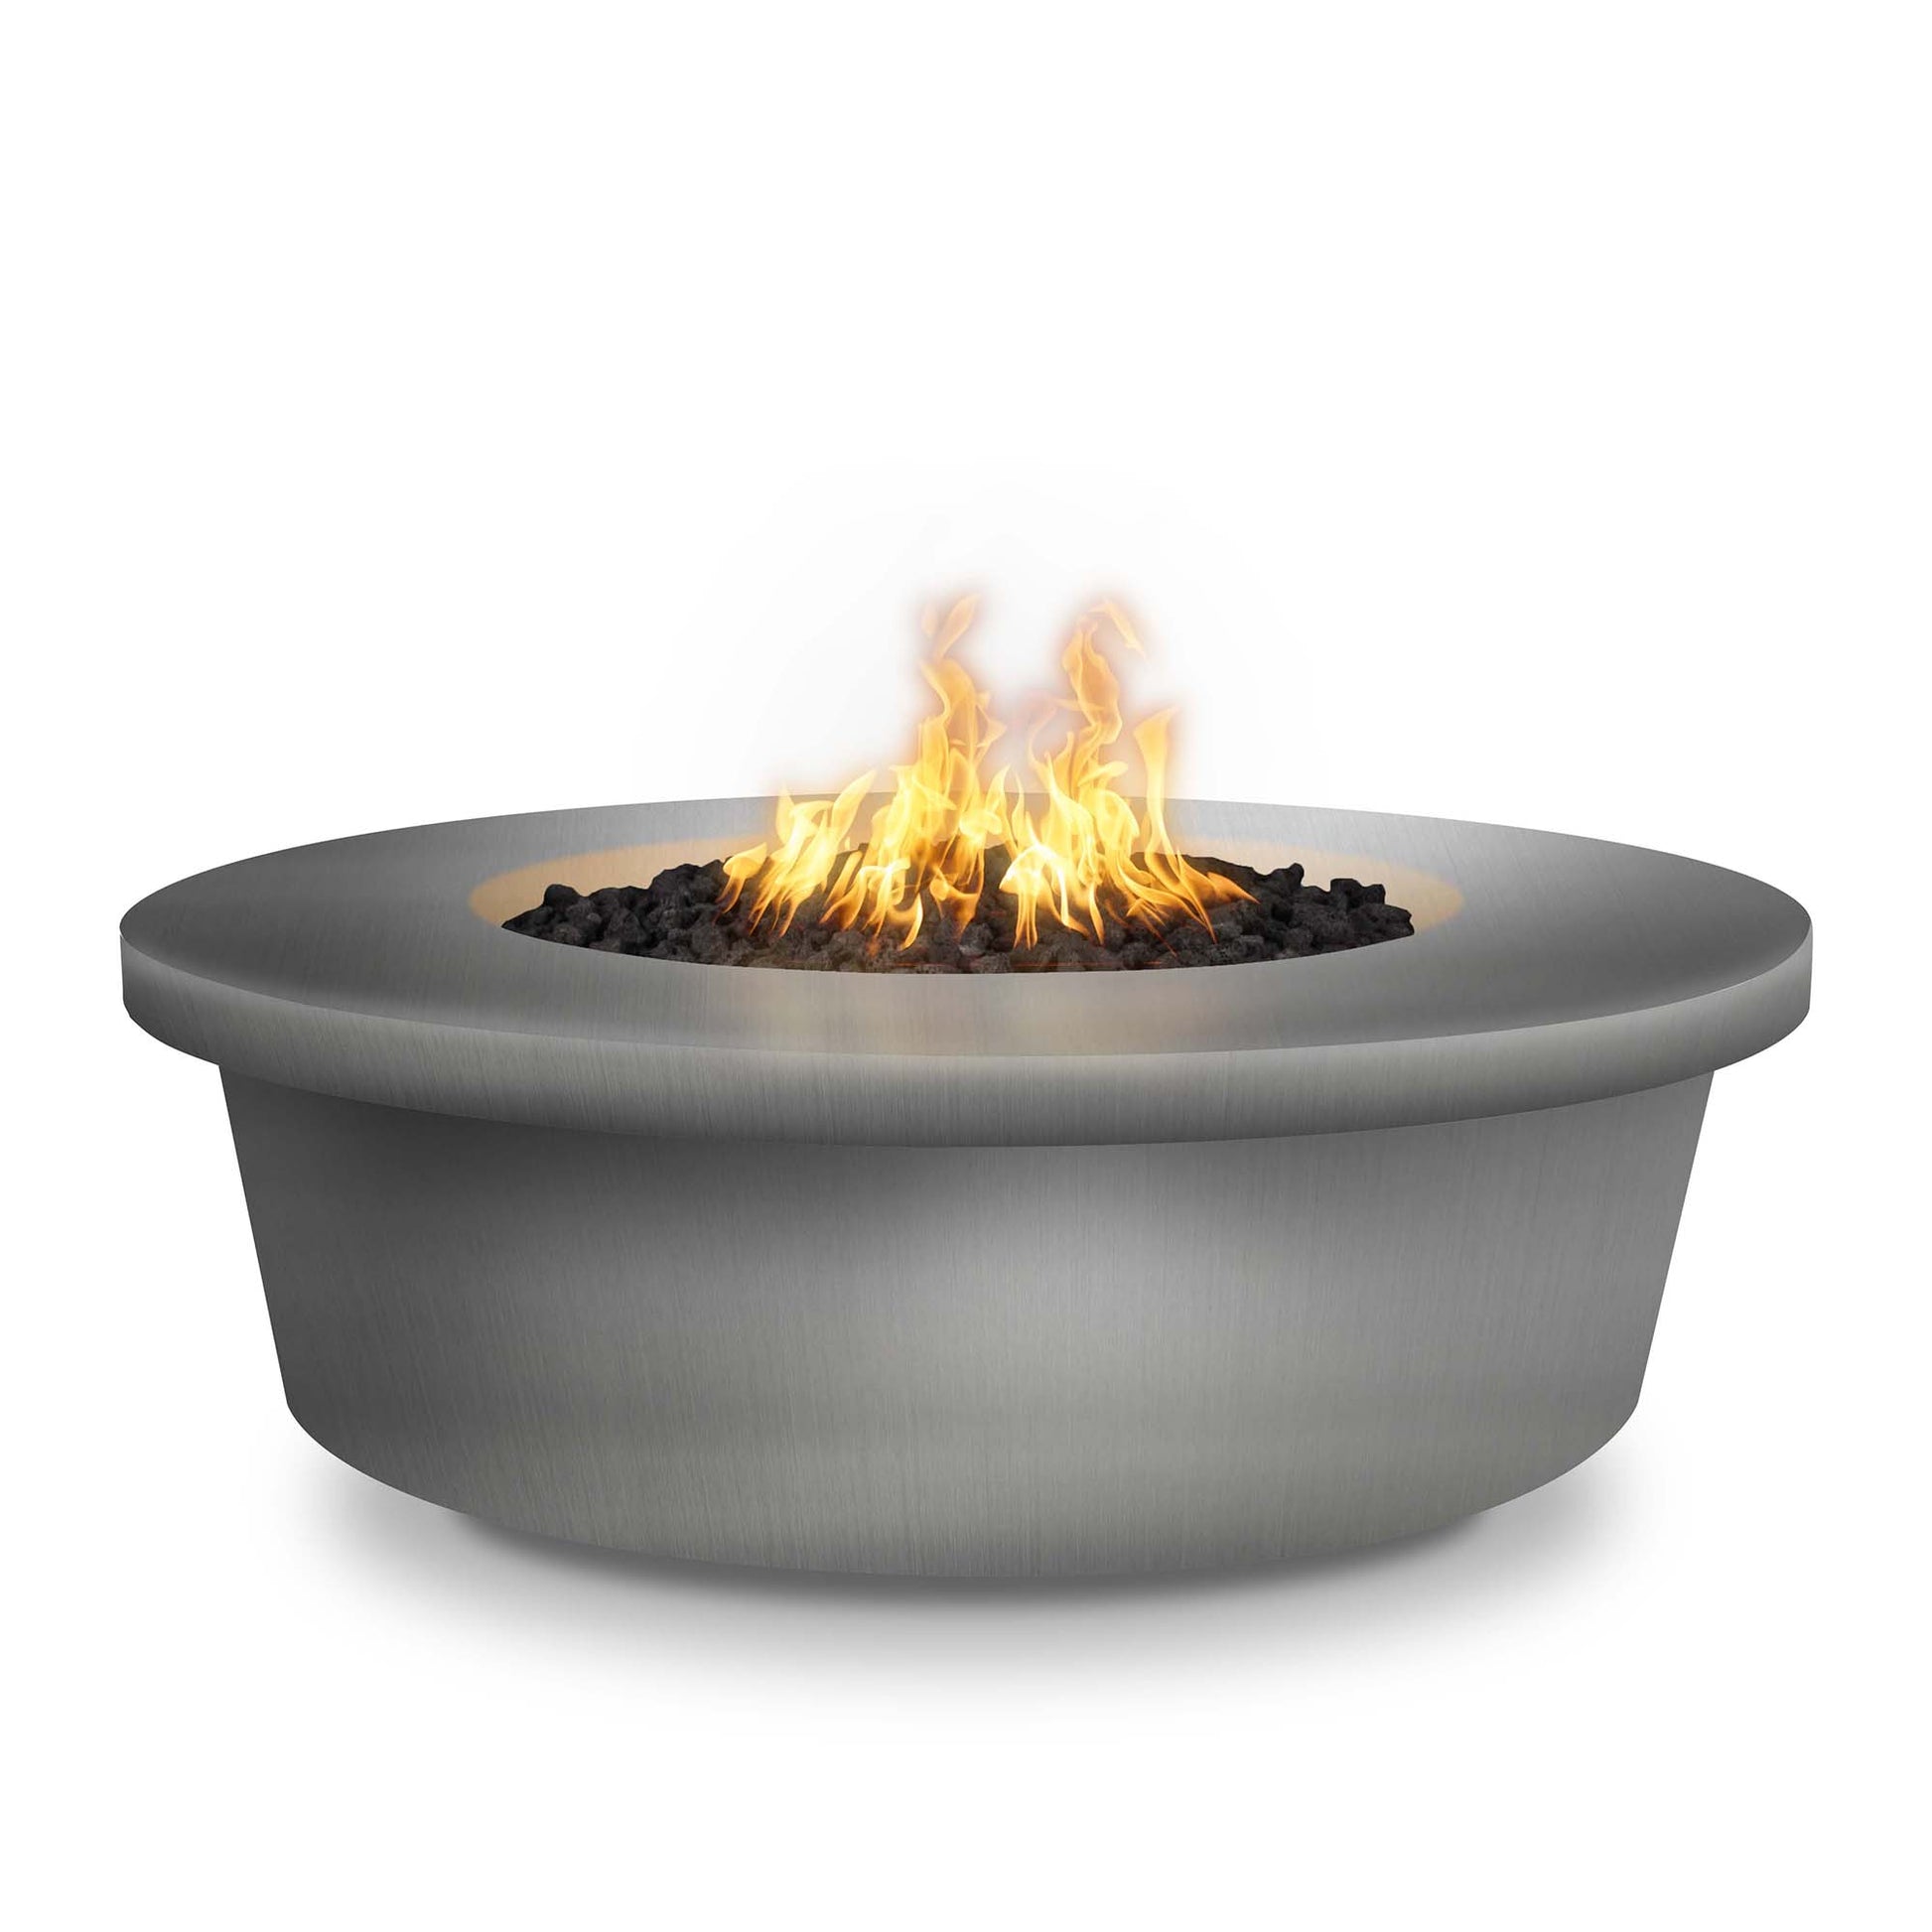 The Outdoor Plus Round Tempe 48" Hammered Copper Liquid Propane Fire Pit with Match Lit Ignition